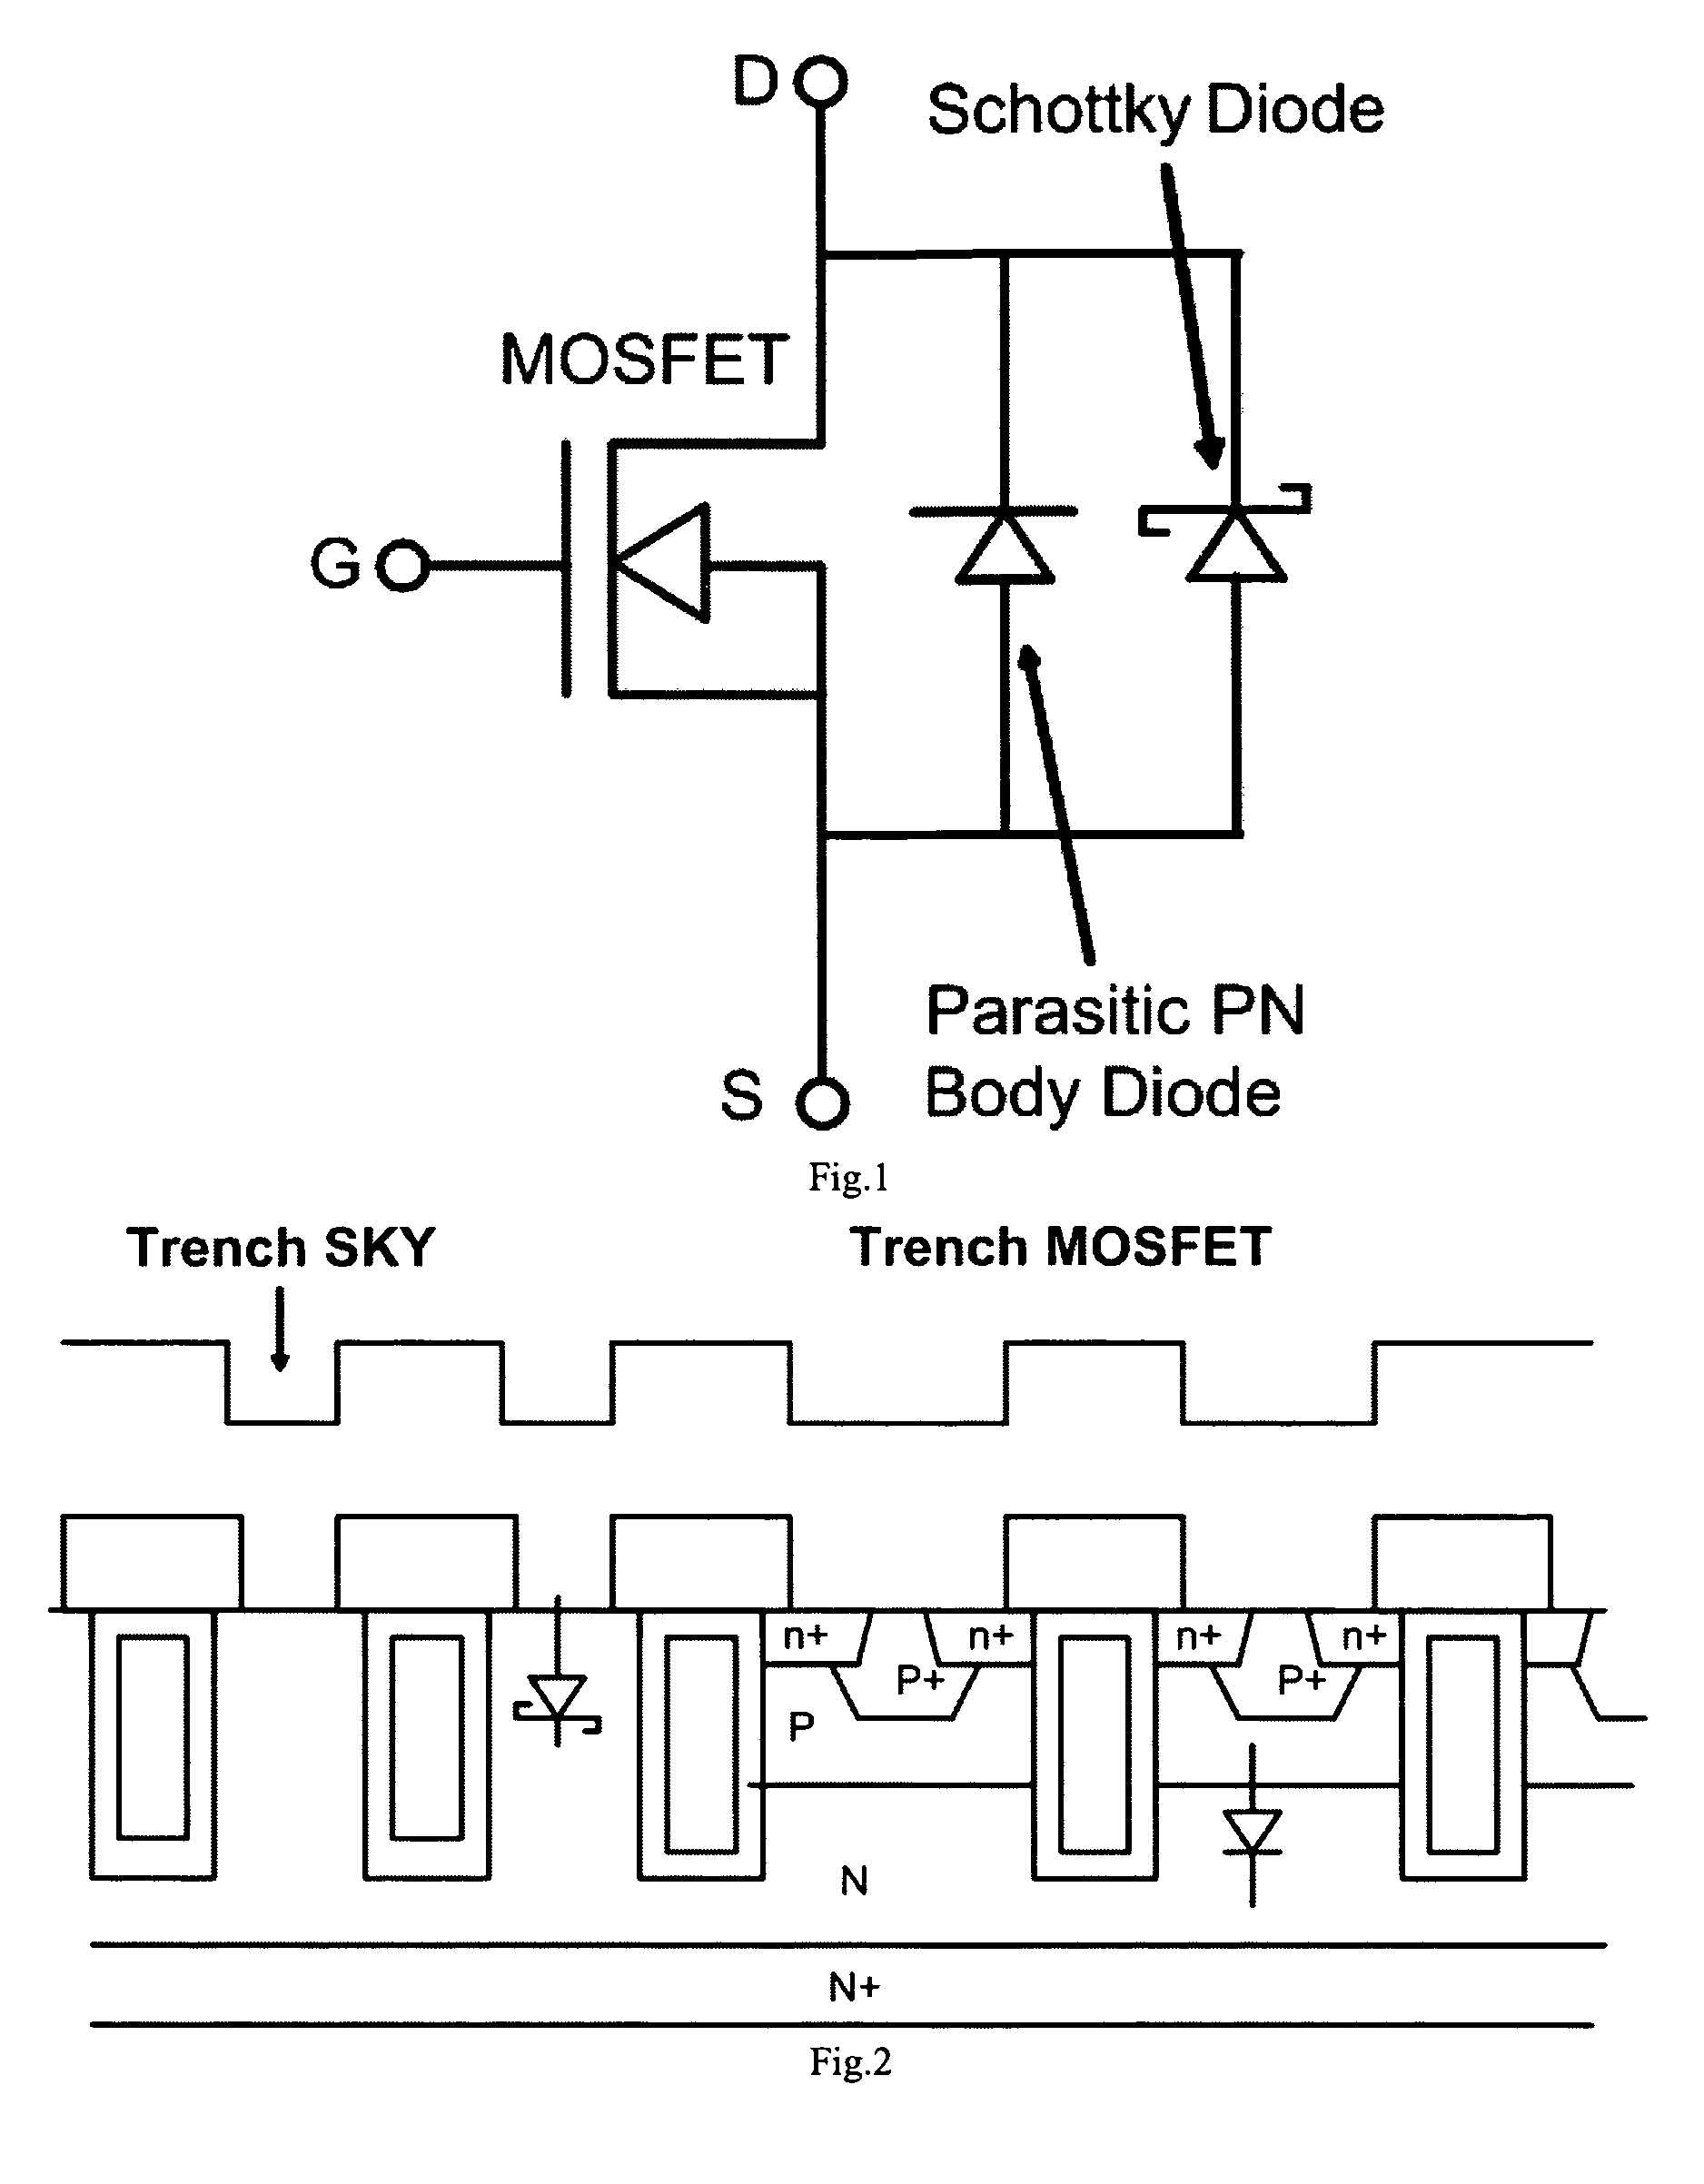 Integrated trench MOSFET and junction barrier schottky rectifier with trench contact structures